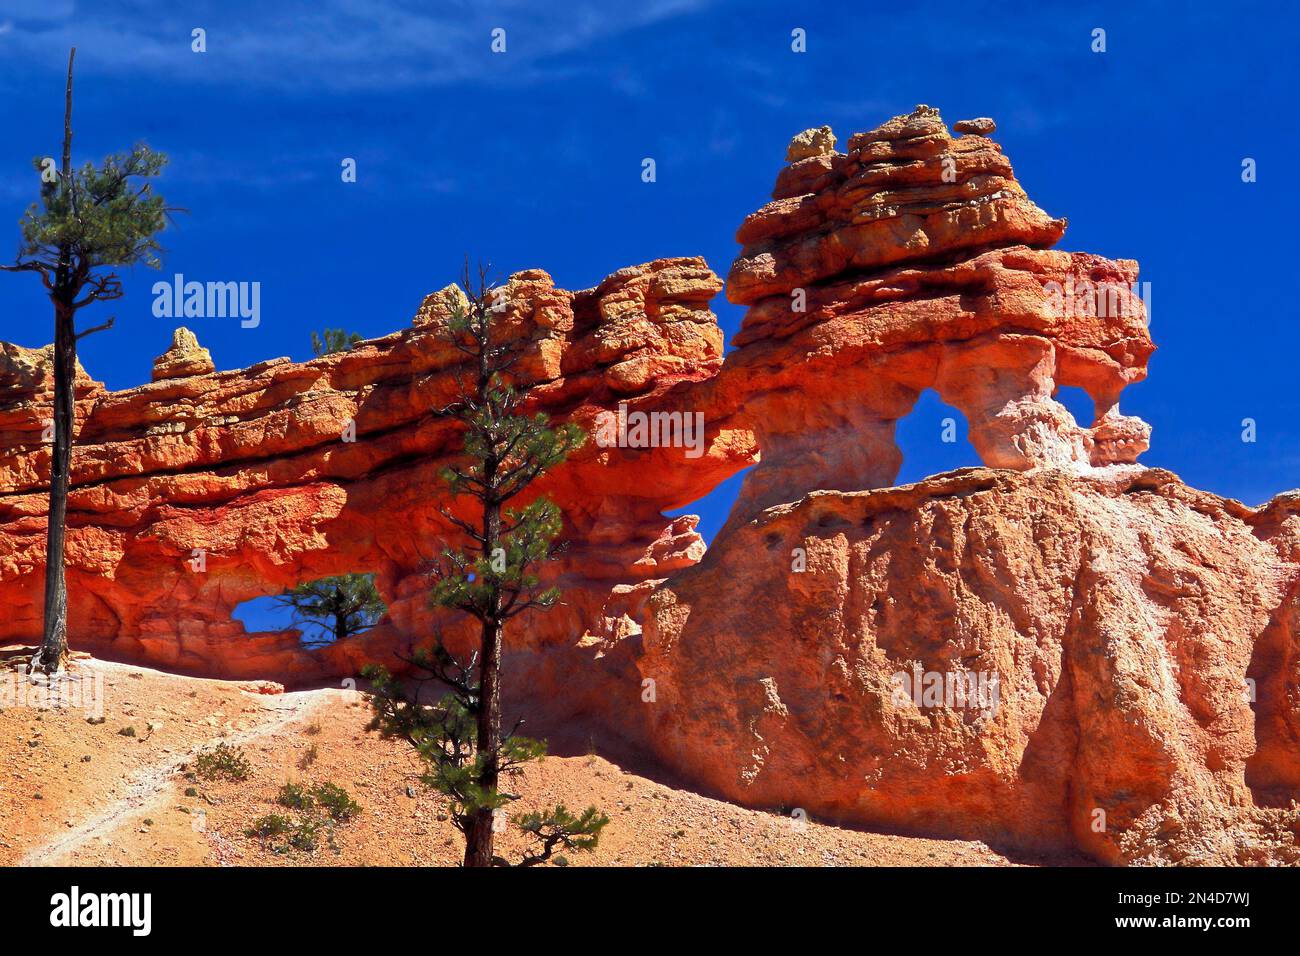 Formations de roches rouges ; Hoodoos ; arches ; érosion différentielle ; paysage, Pittoresque, Mossy Cave Trail ; parc national de Bryce Canyon ; Utah ; Bryce Canyon, Utah ; Banque D'Images